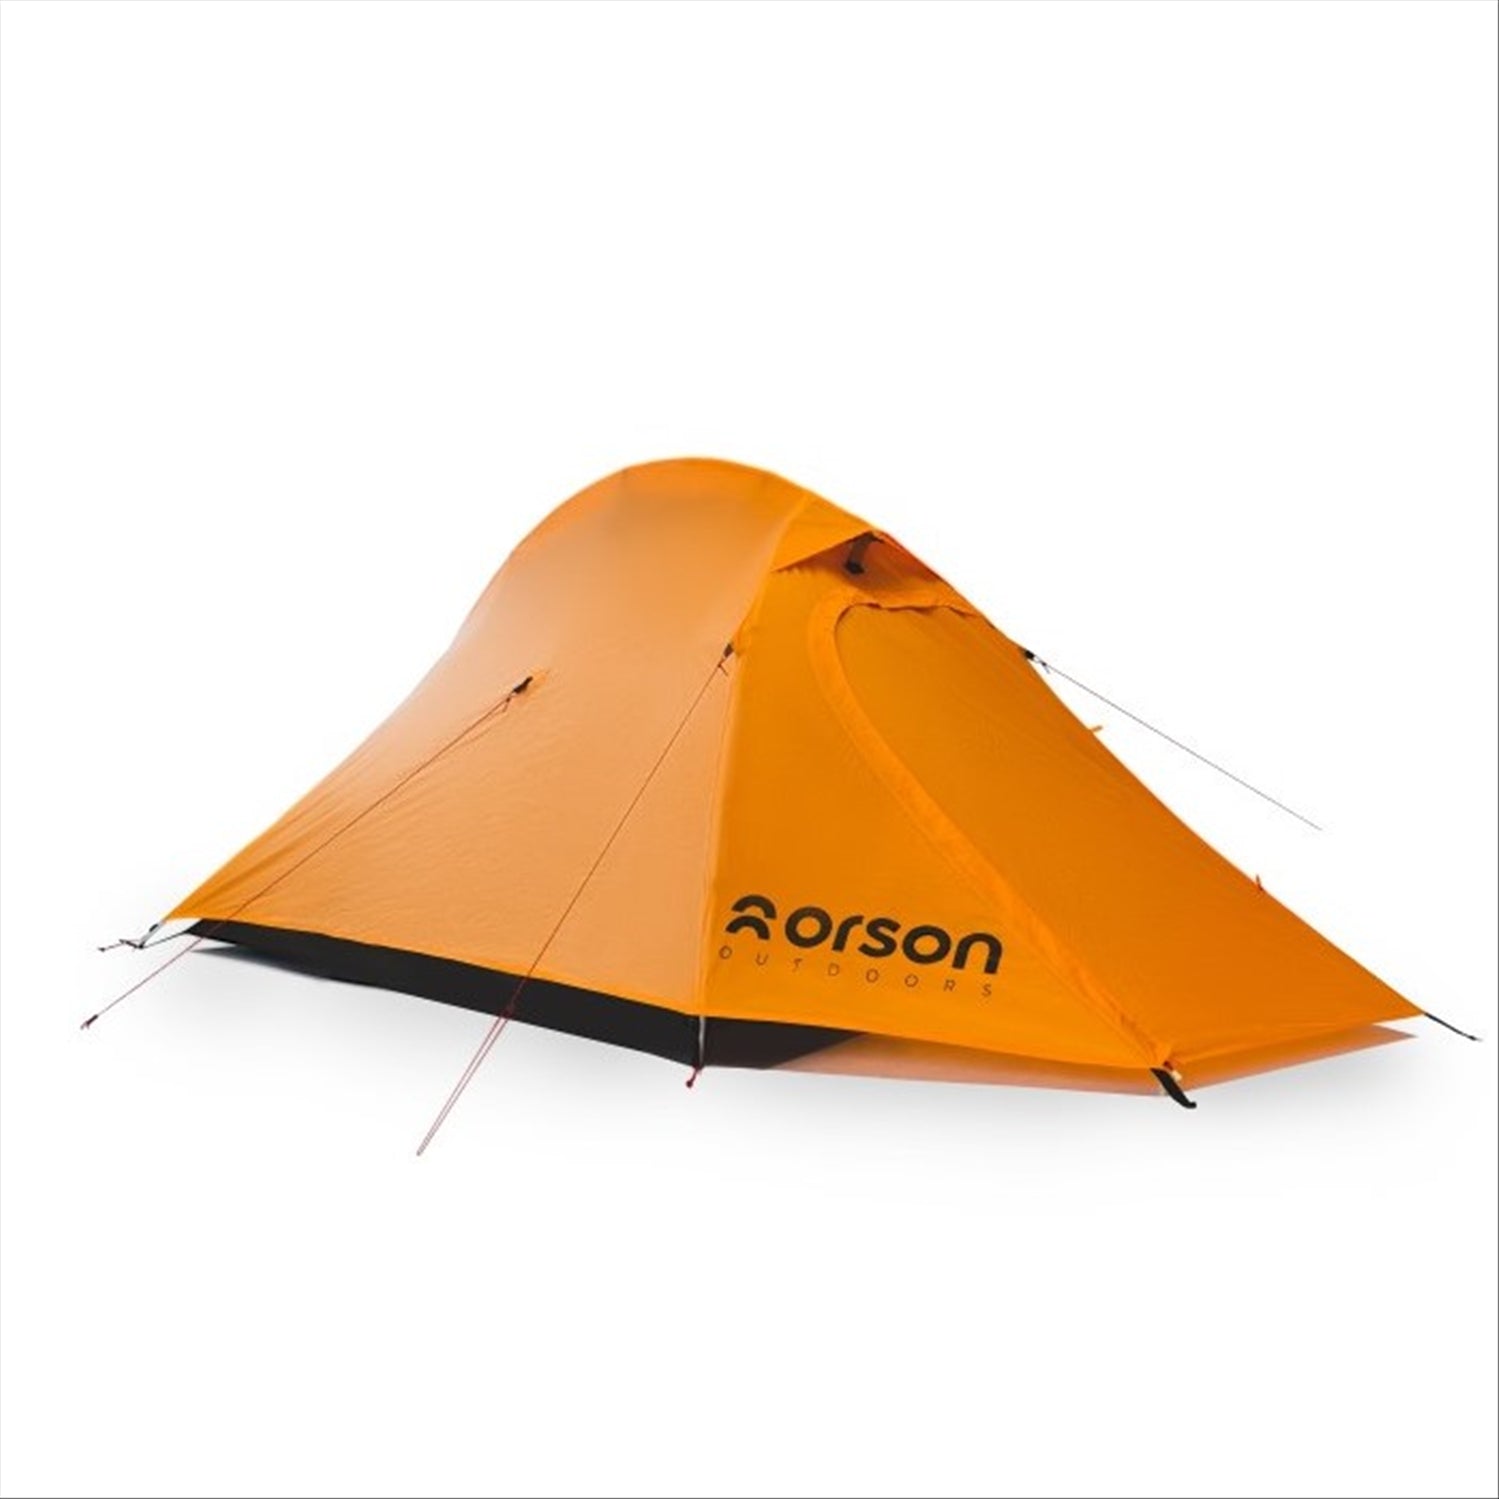 Tracker 2 - Ripstop Lightweight 2 Person Hiking Tent, 1.95kg